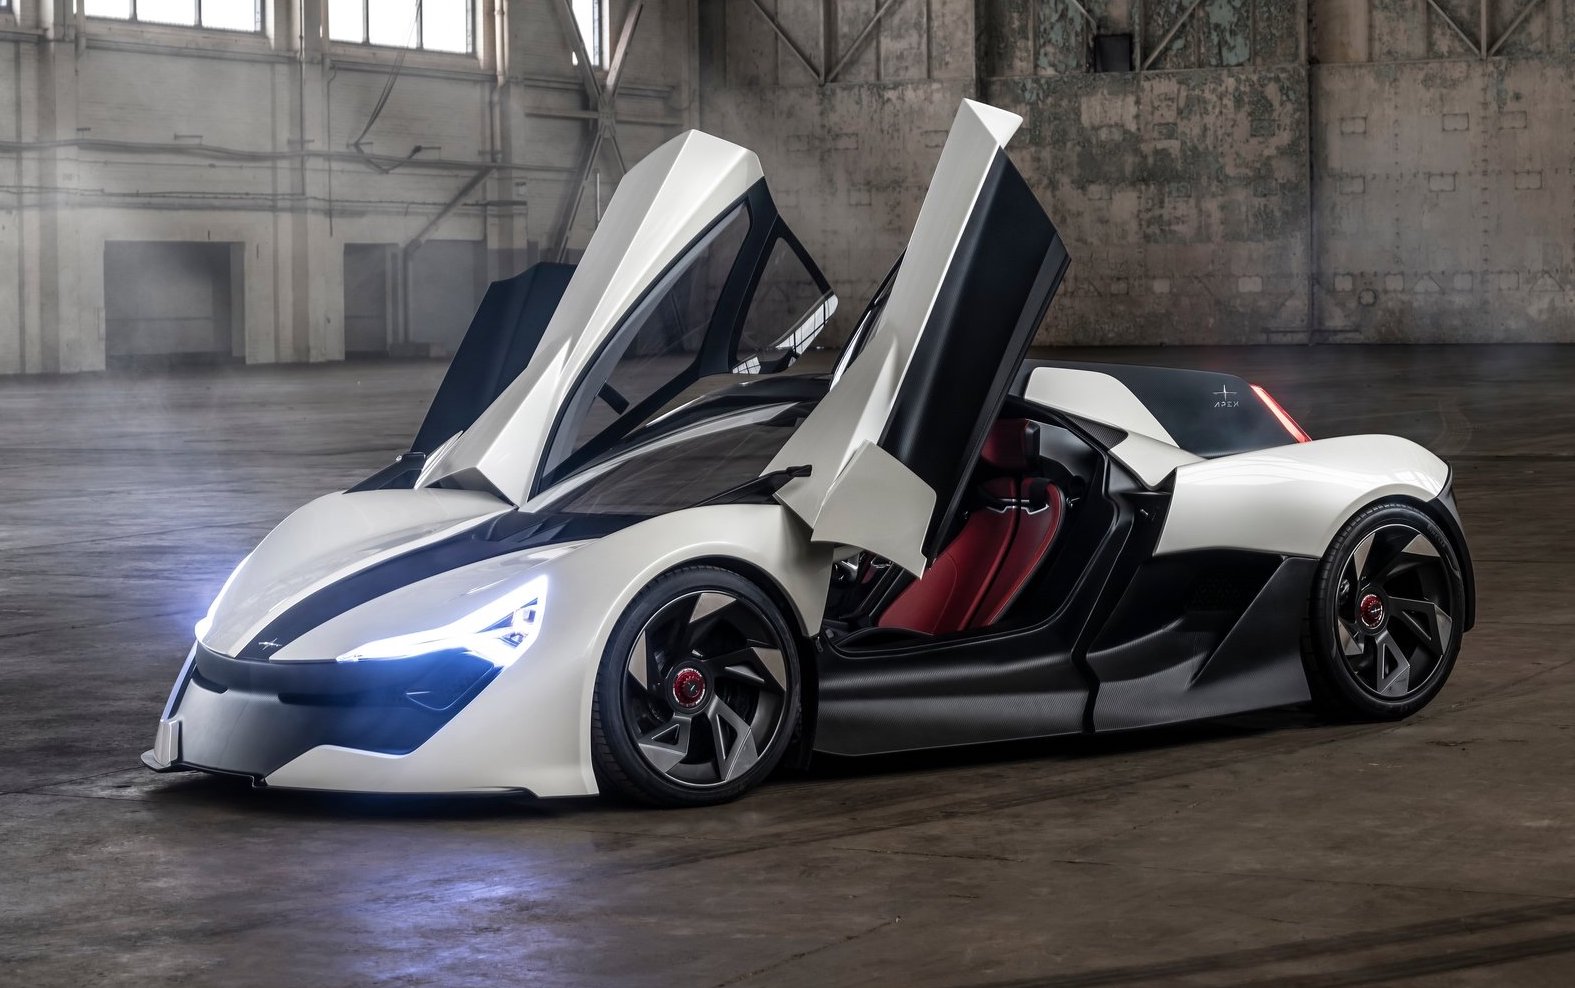 APEX AP-0 revealed as new 485kW electric supercar